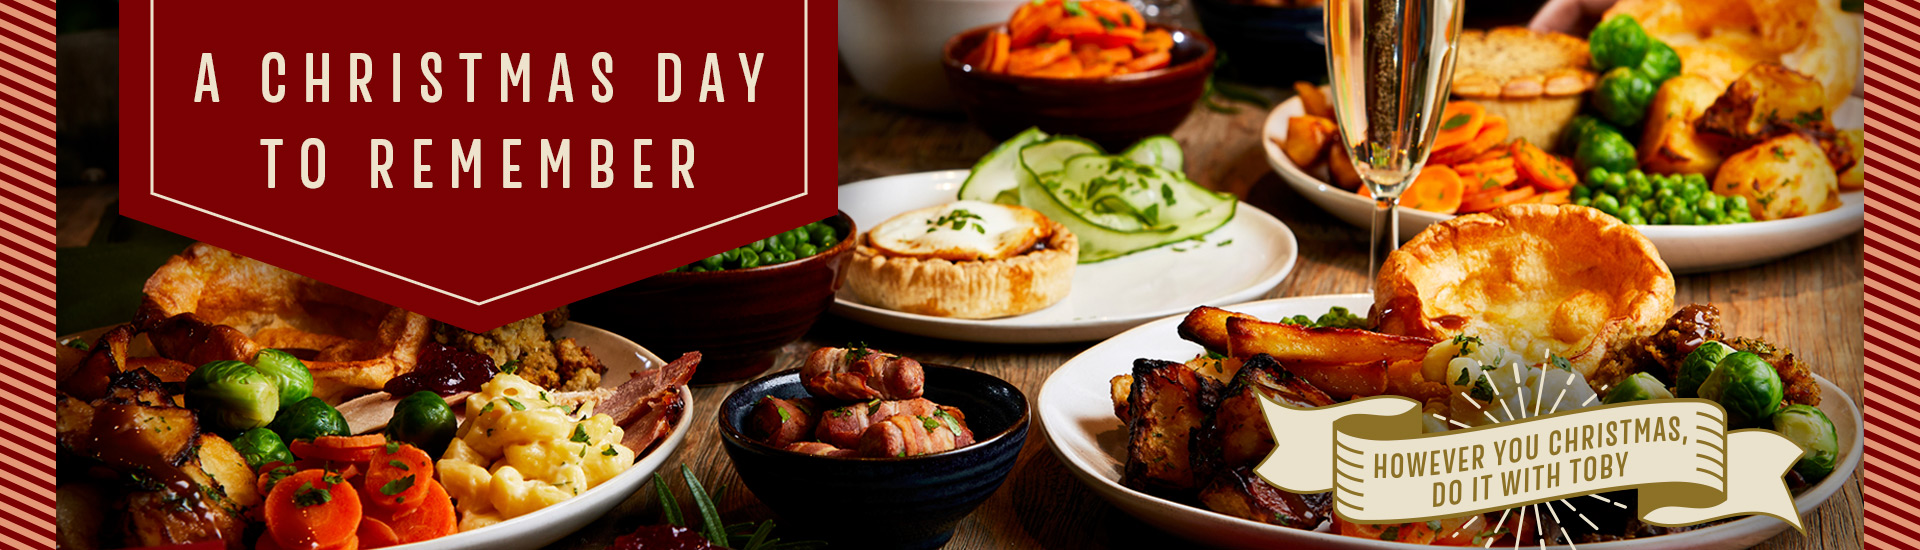 Christmas Day menu at Toby Carvery Metrocentre